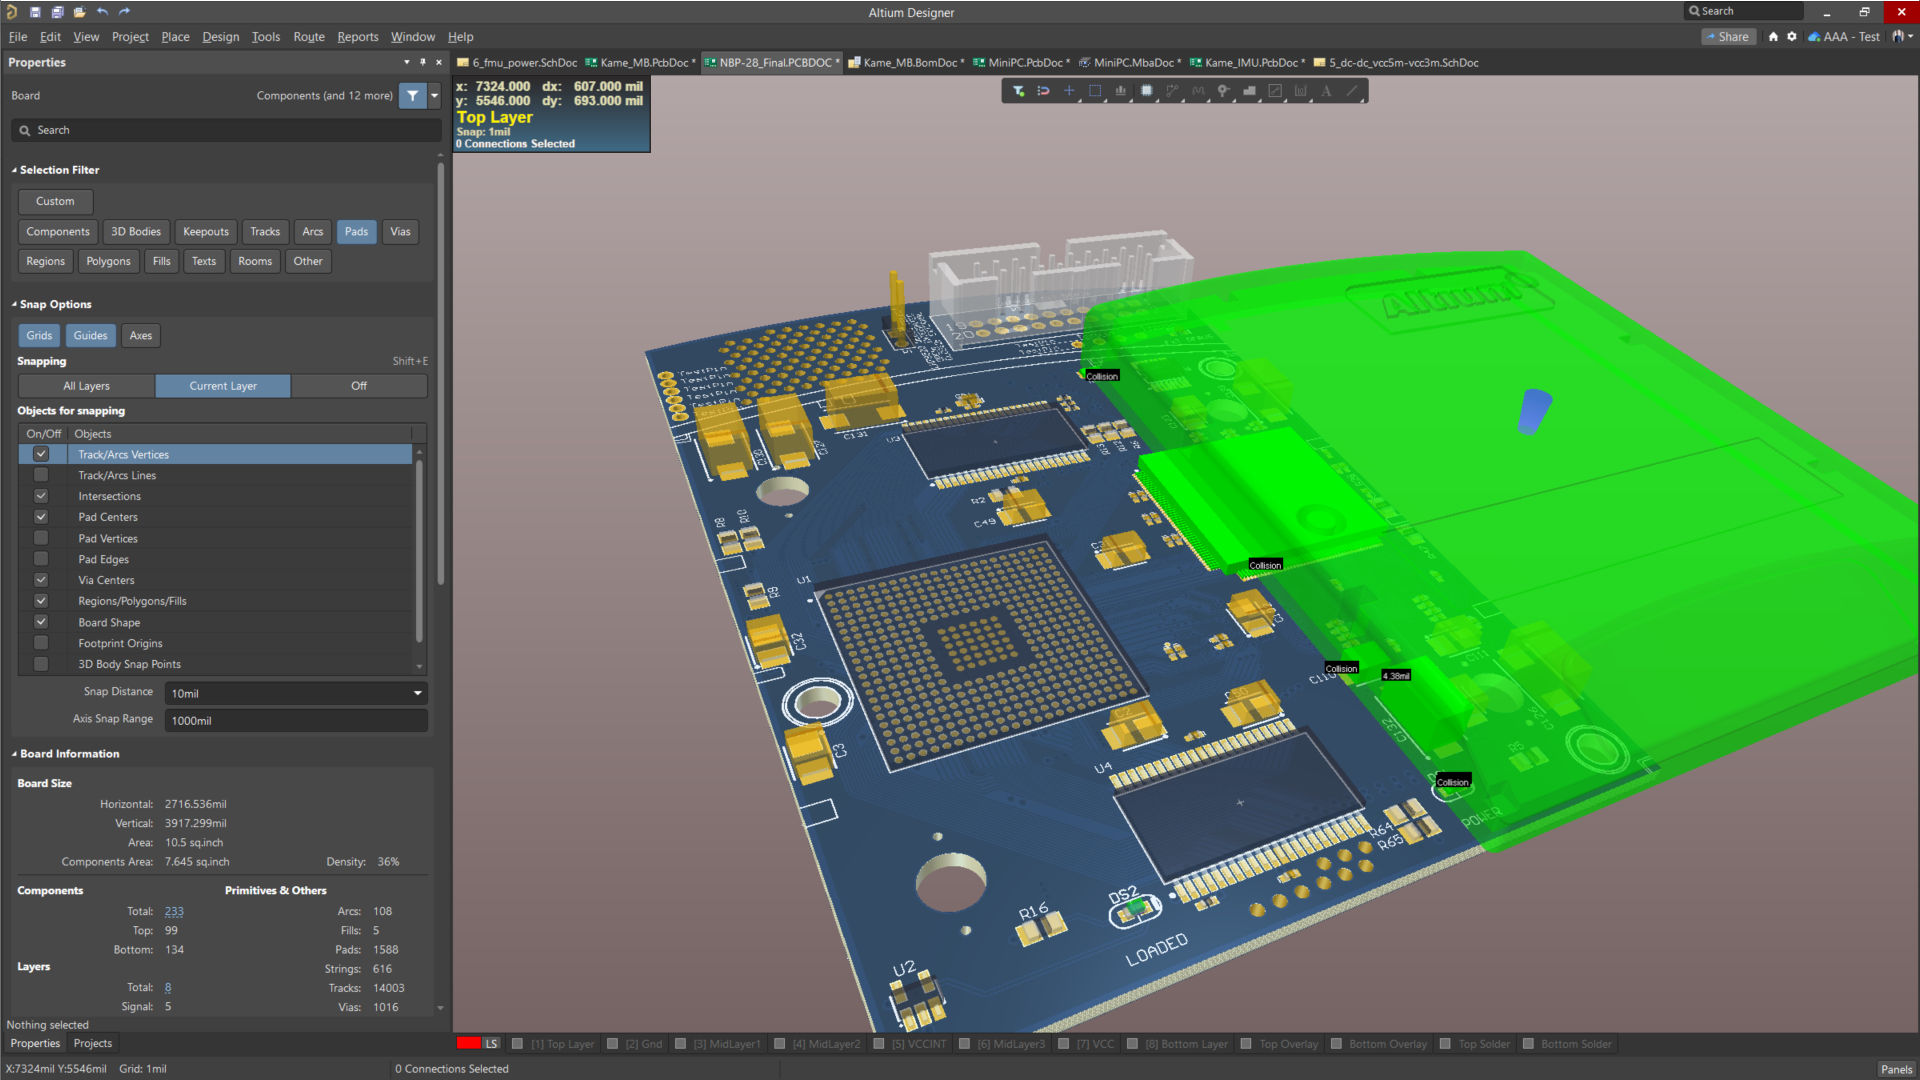 Altium Designer's 3D PCB editor allows you to perform 3D collision testing as well as catching general component-to-component collisions. Confidently position one component under another, or test if the loaded board fits correctly into the enclosure.